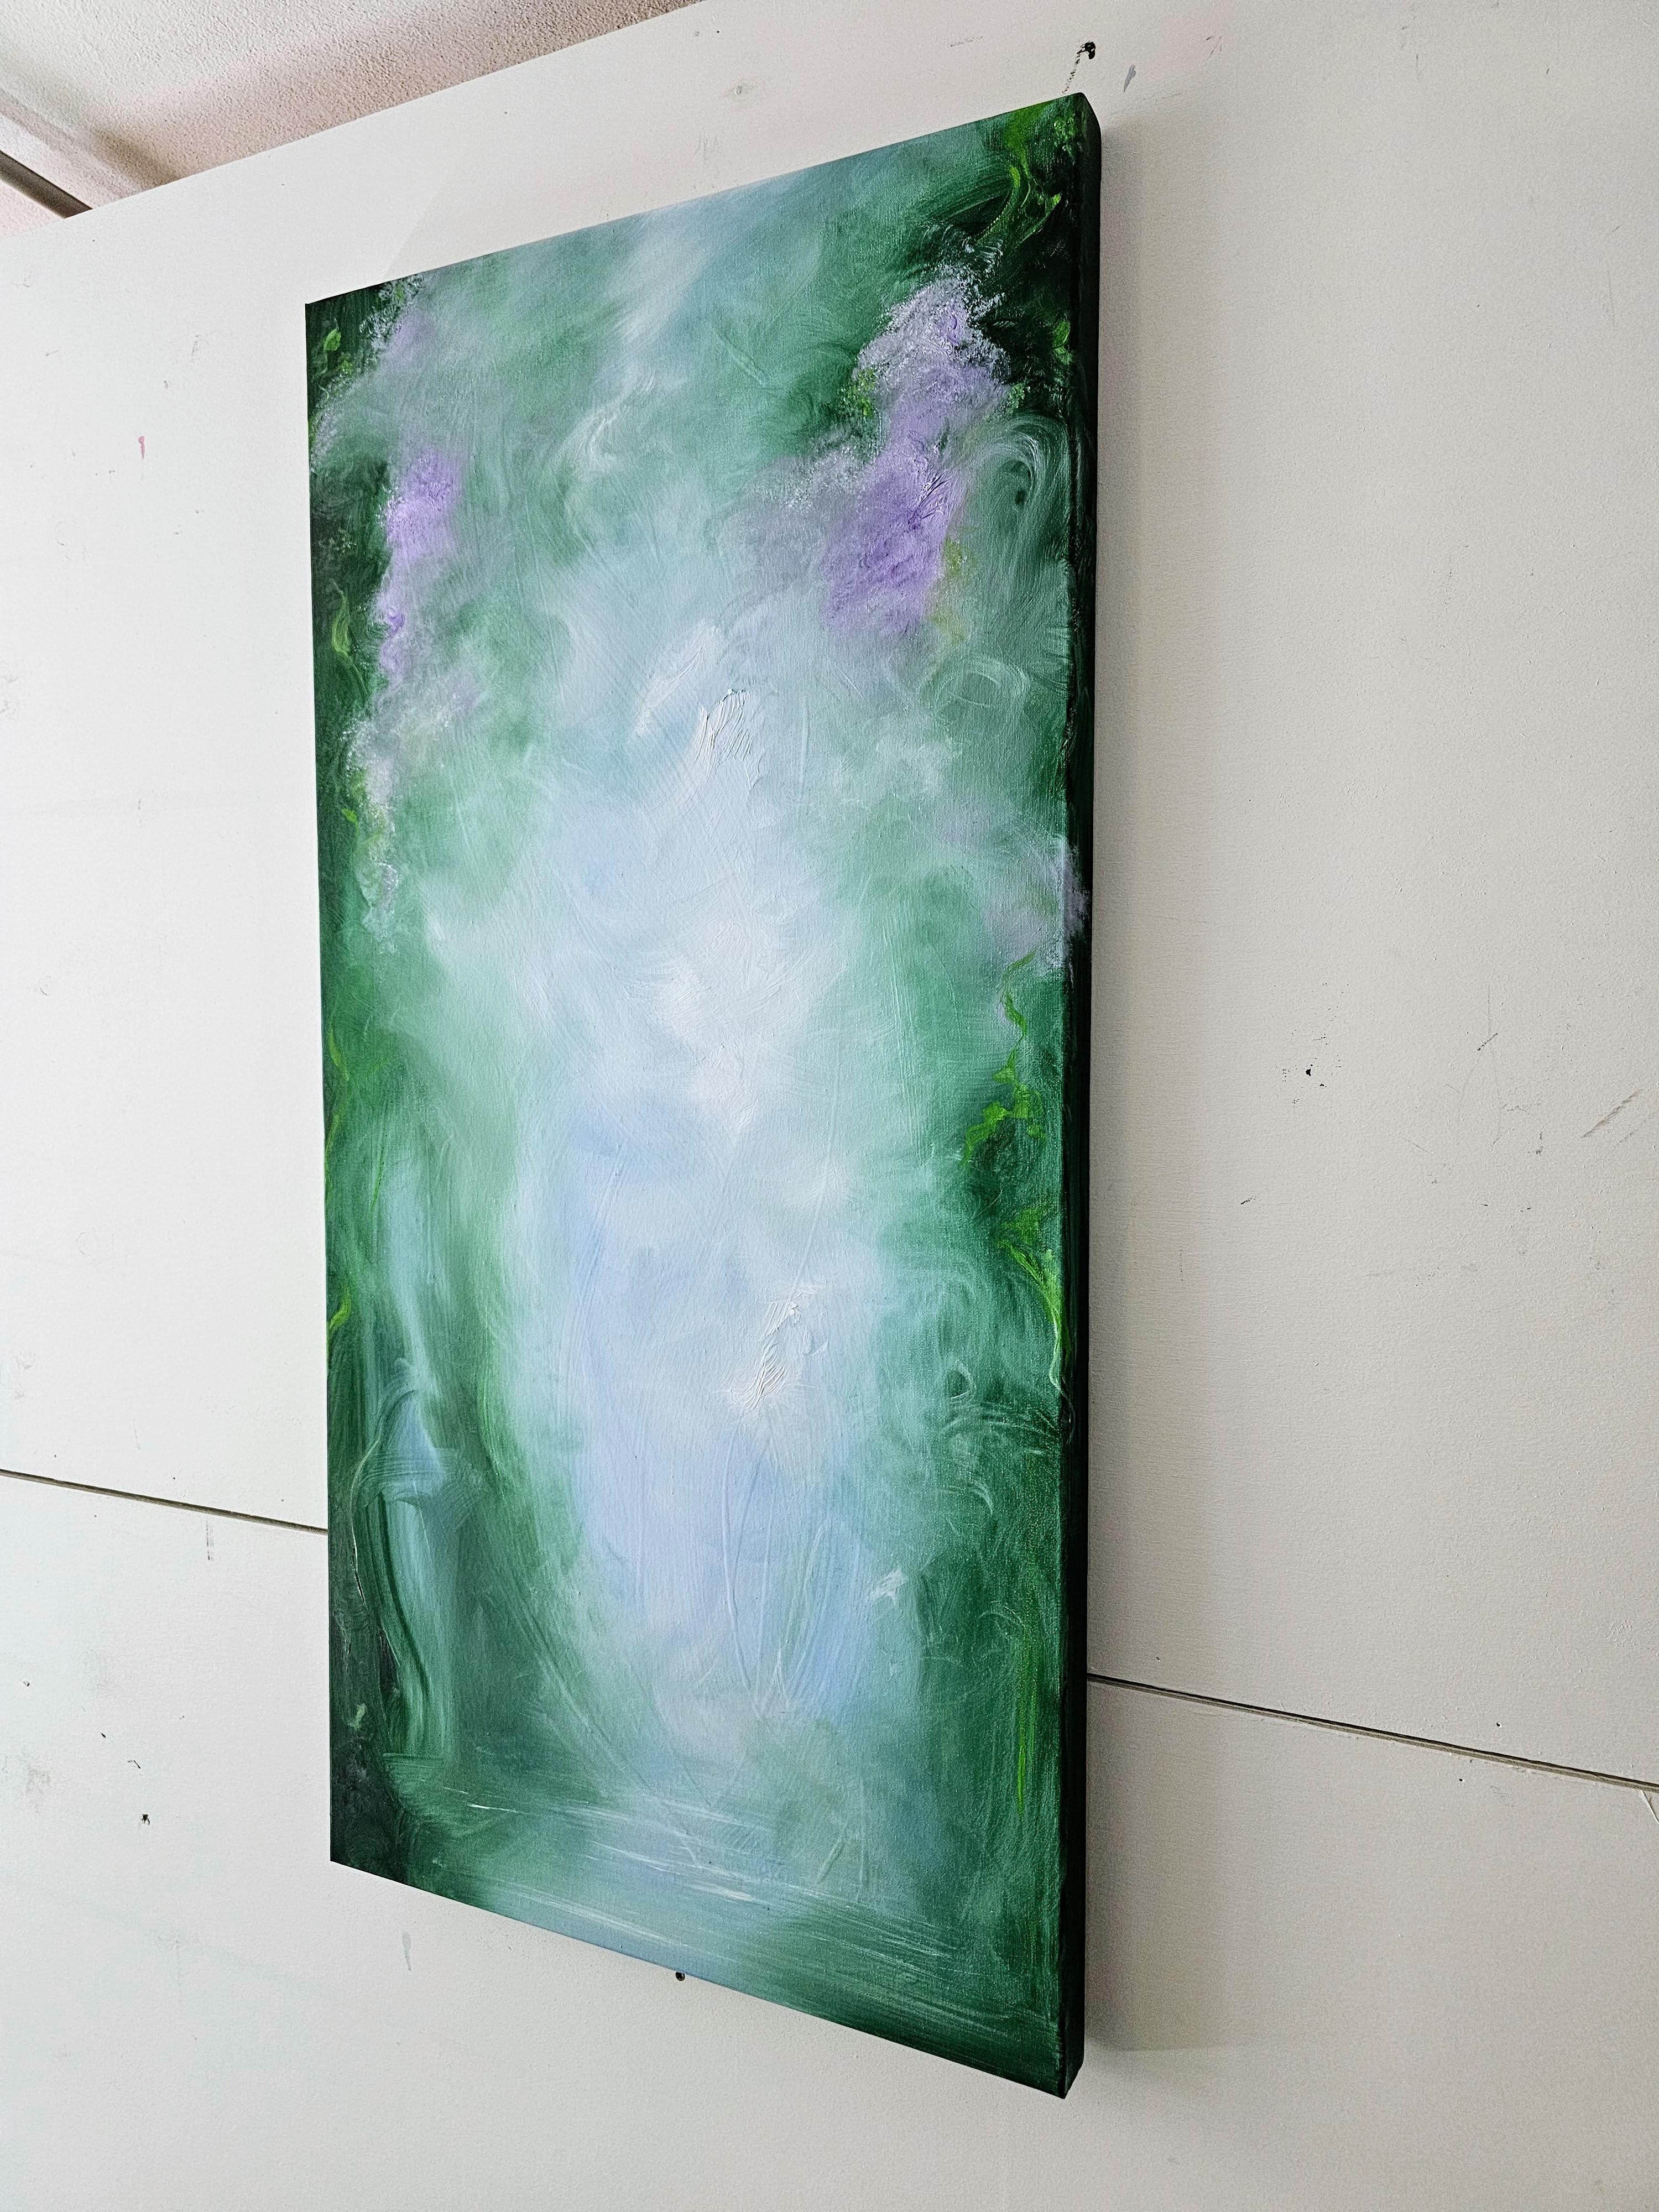 Summer solstice - Vibrant green abstract nature painting - Abstract Painting by Jennifer L. Baker